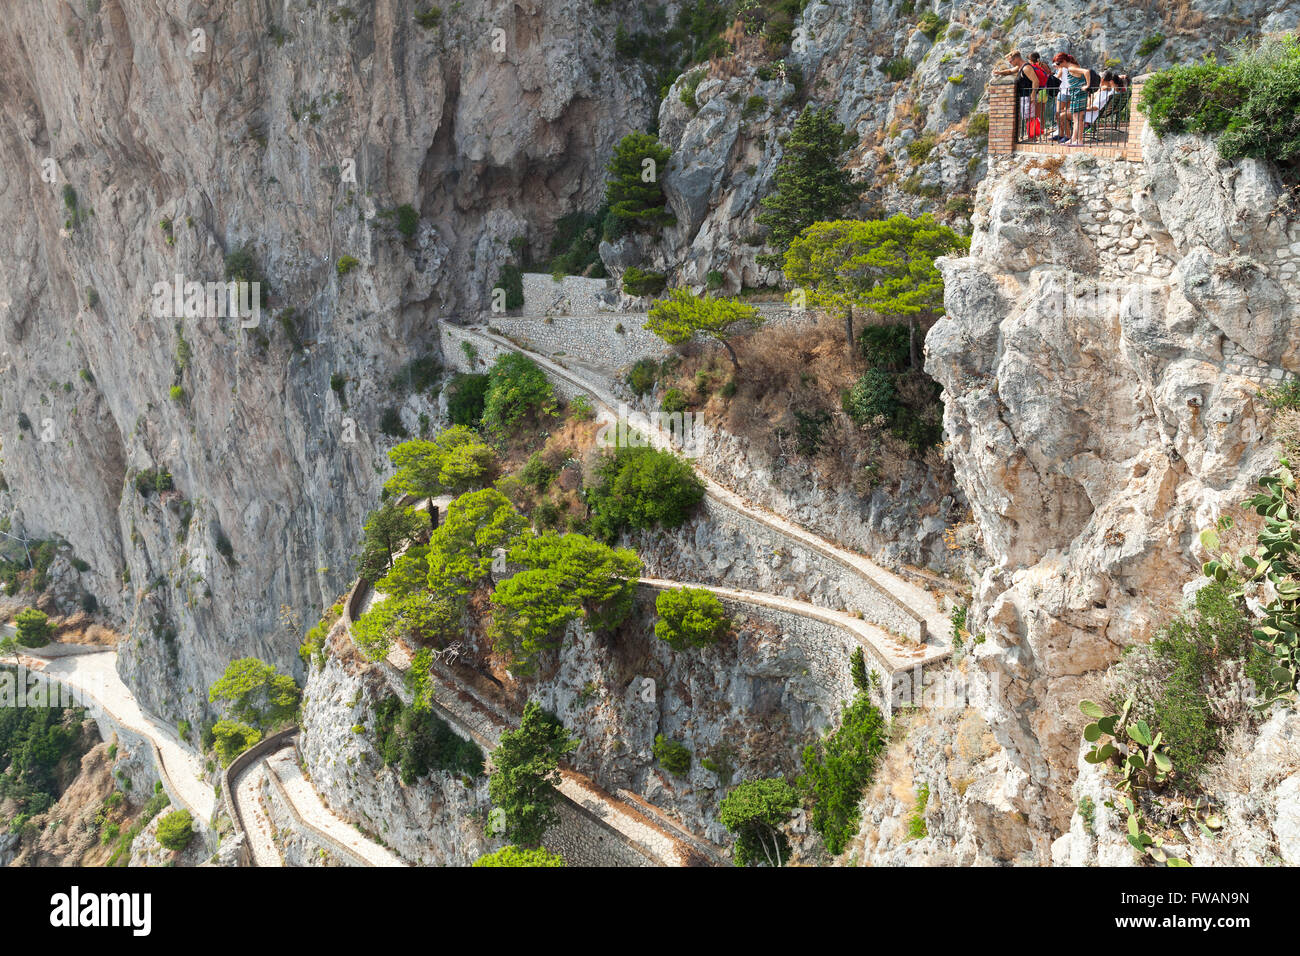 Capri, Italy - August 14, 2015: Tourists looks down on winding mountain road from high viewpoint of Capri island Stock Photo